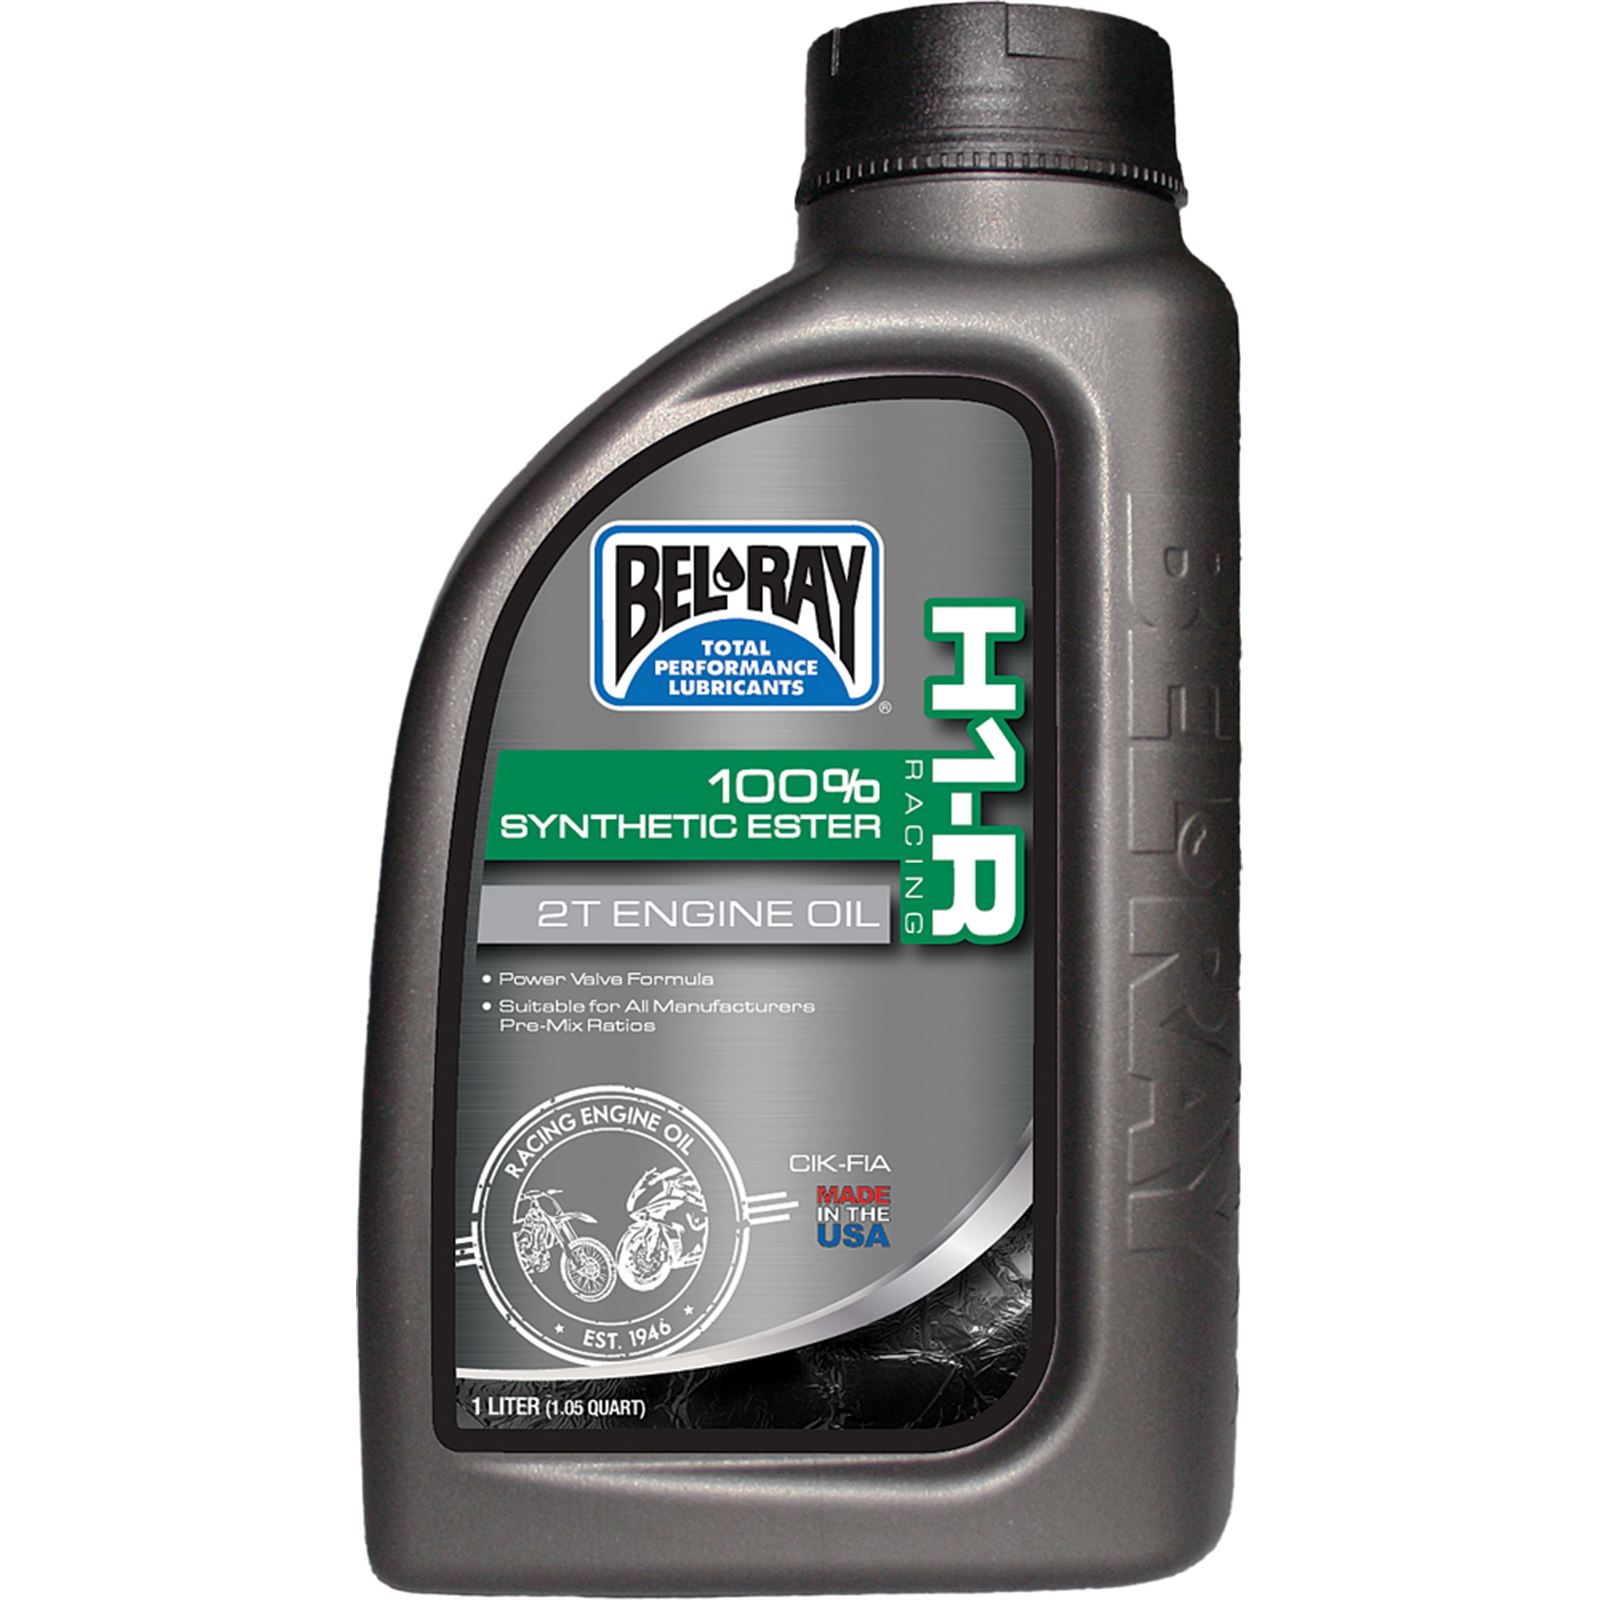 Bel-Ray H1-R 100% Synthetic Ester 2T Engine Oil - 1/Liter